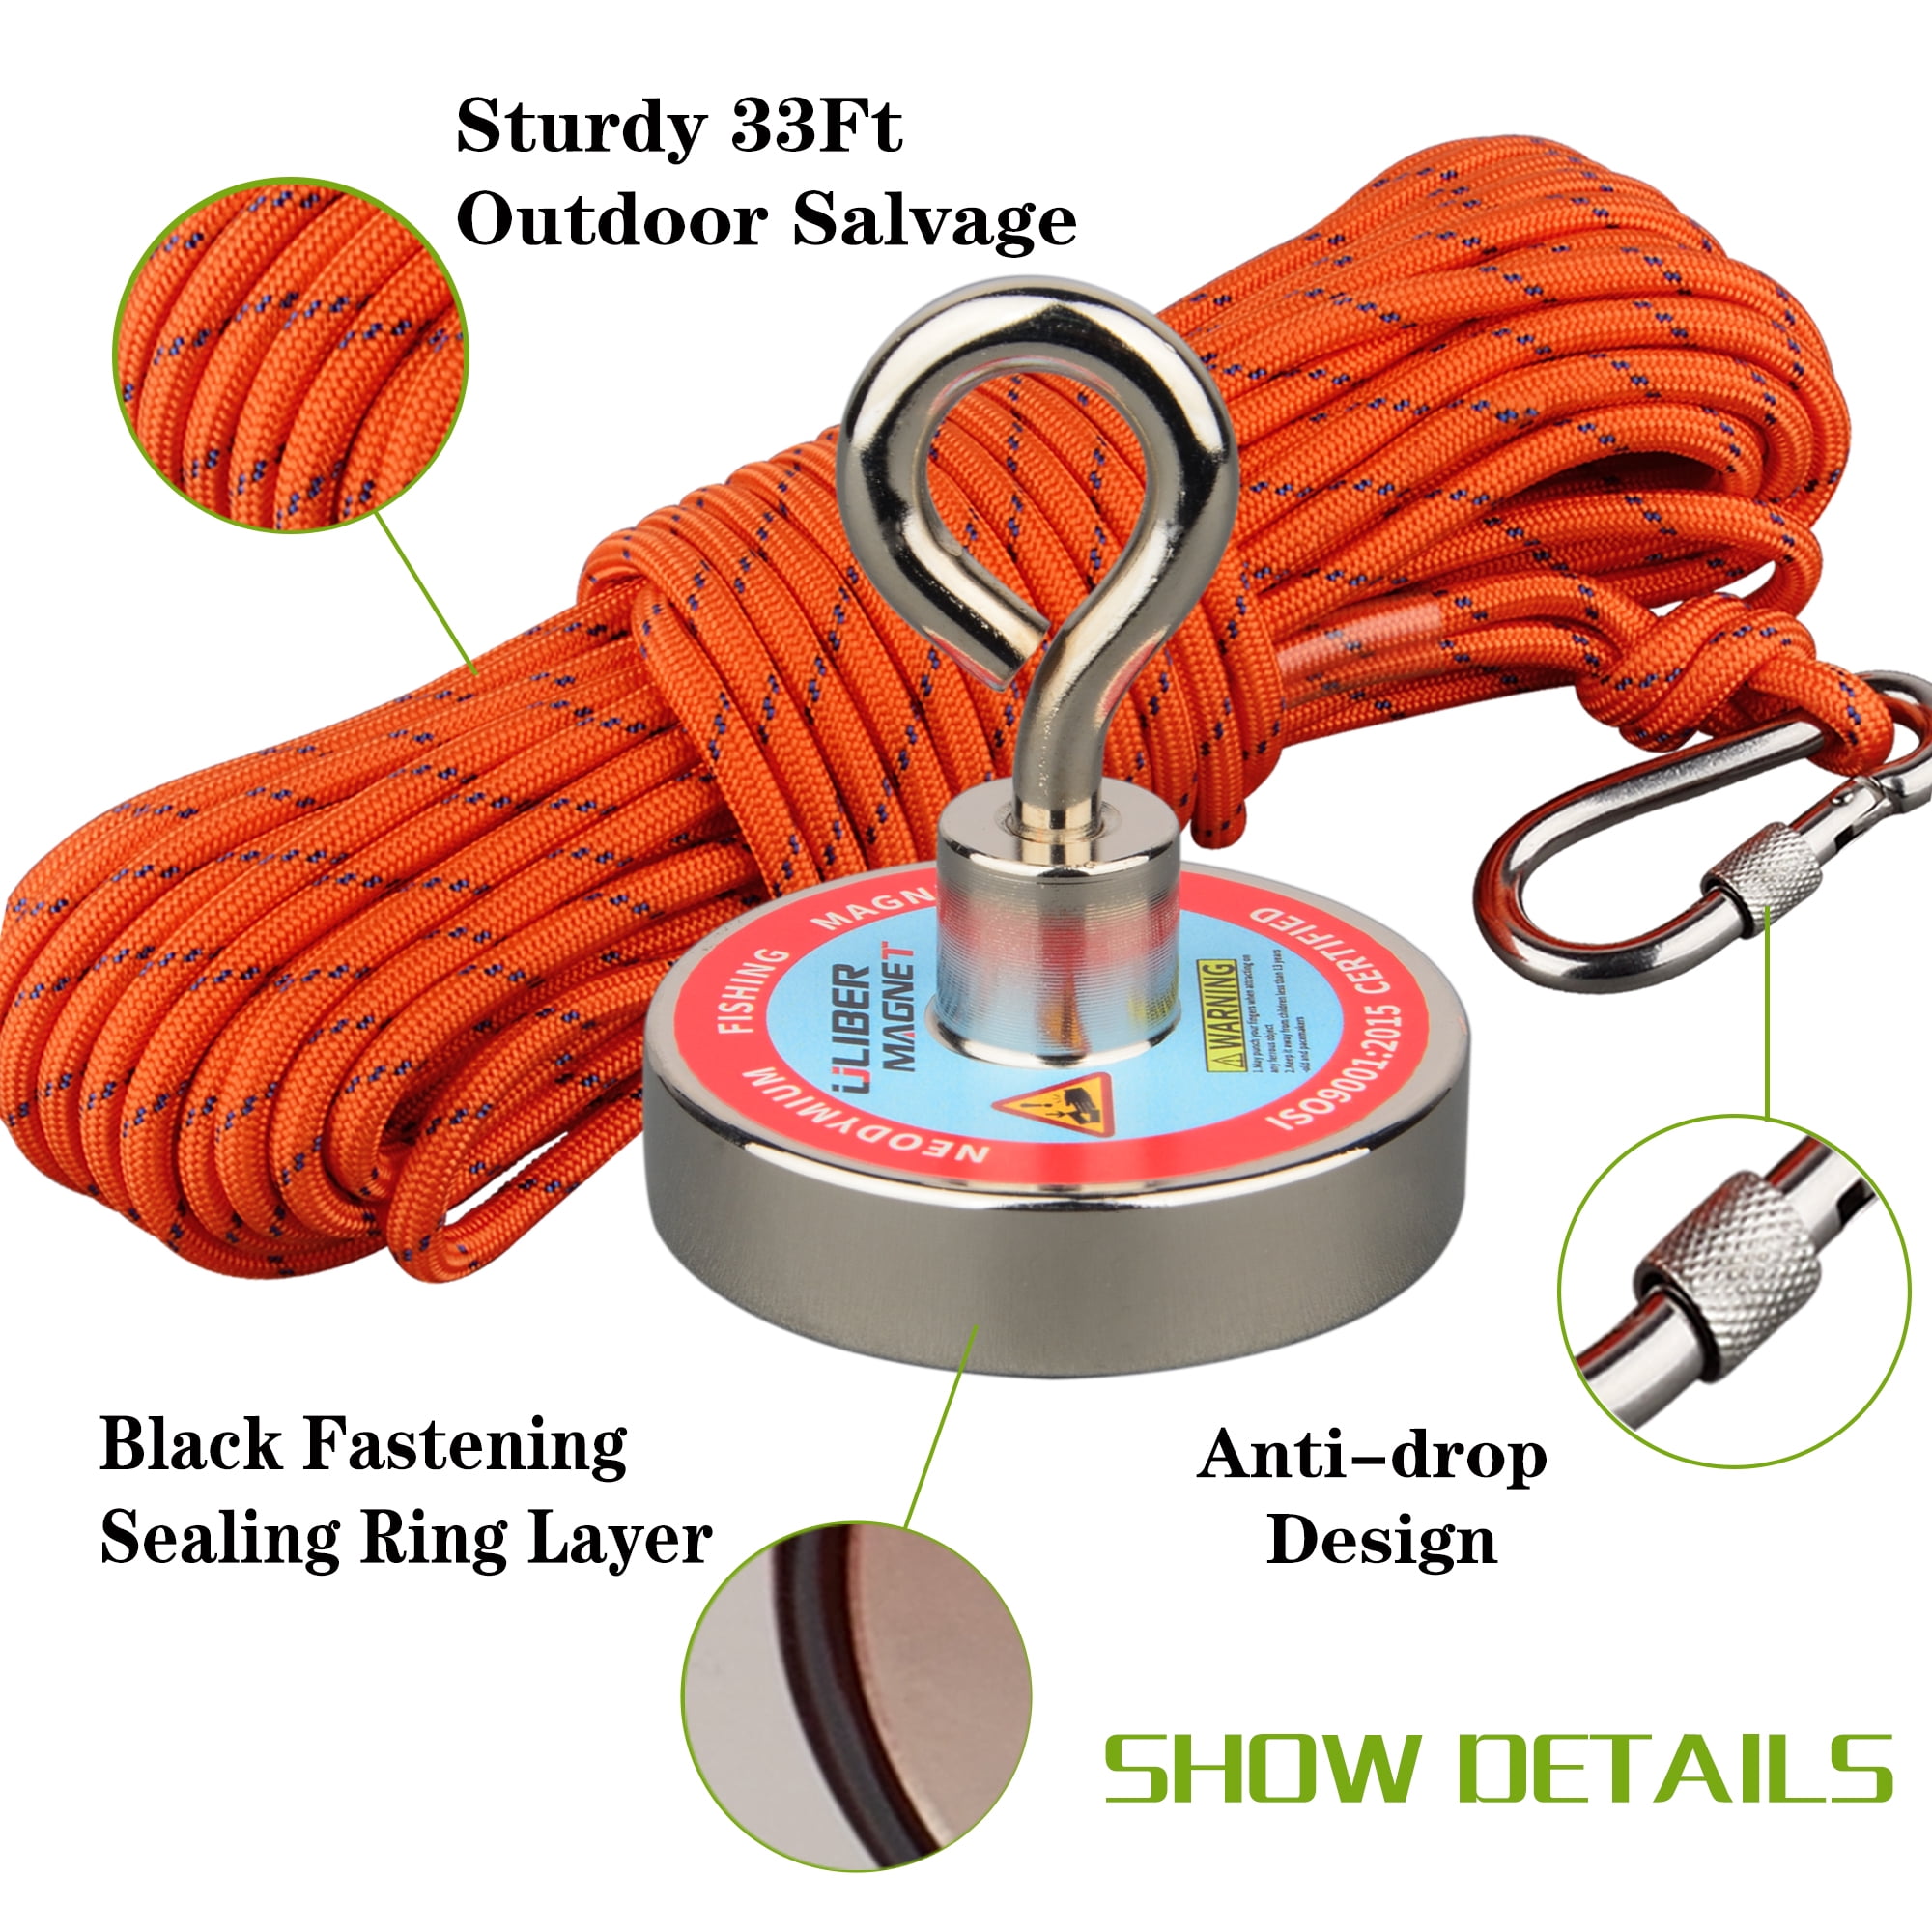 ULIBERMAGNET Double Sided Fishing Magnets Super Strong ,combined 880lb N52 Neodymium Magnet Fishing Kit Starter with Rope,claw,gloves,threadlocker for